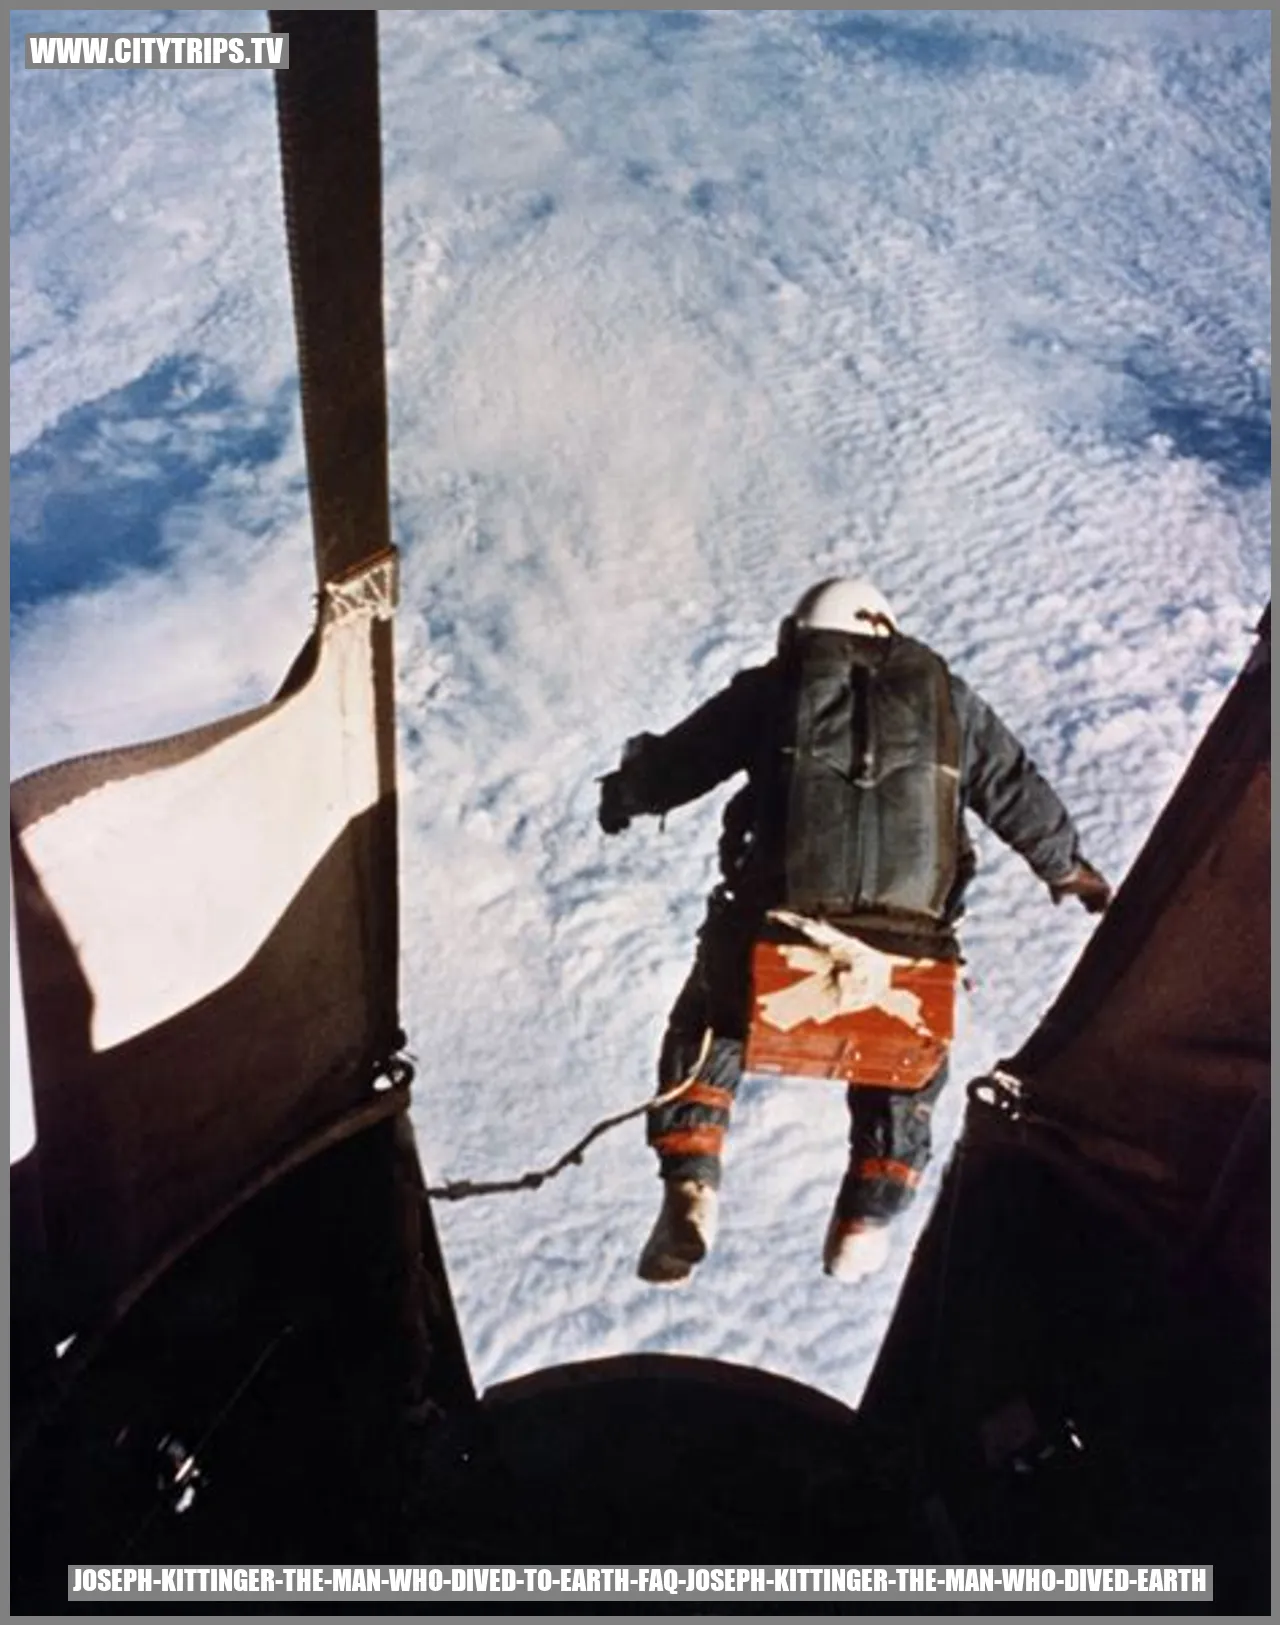 Image of Joseph Kittinger: The Man Who Dived to Earth